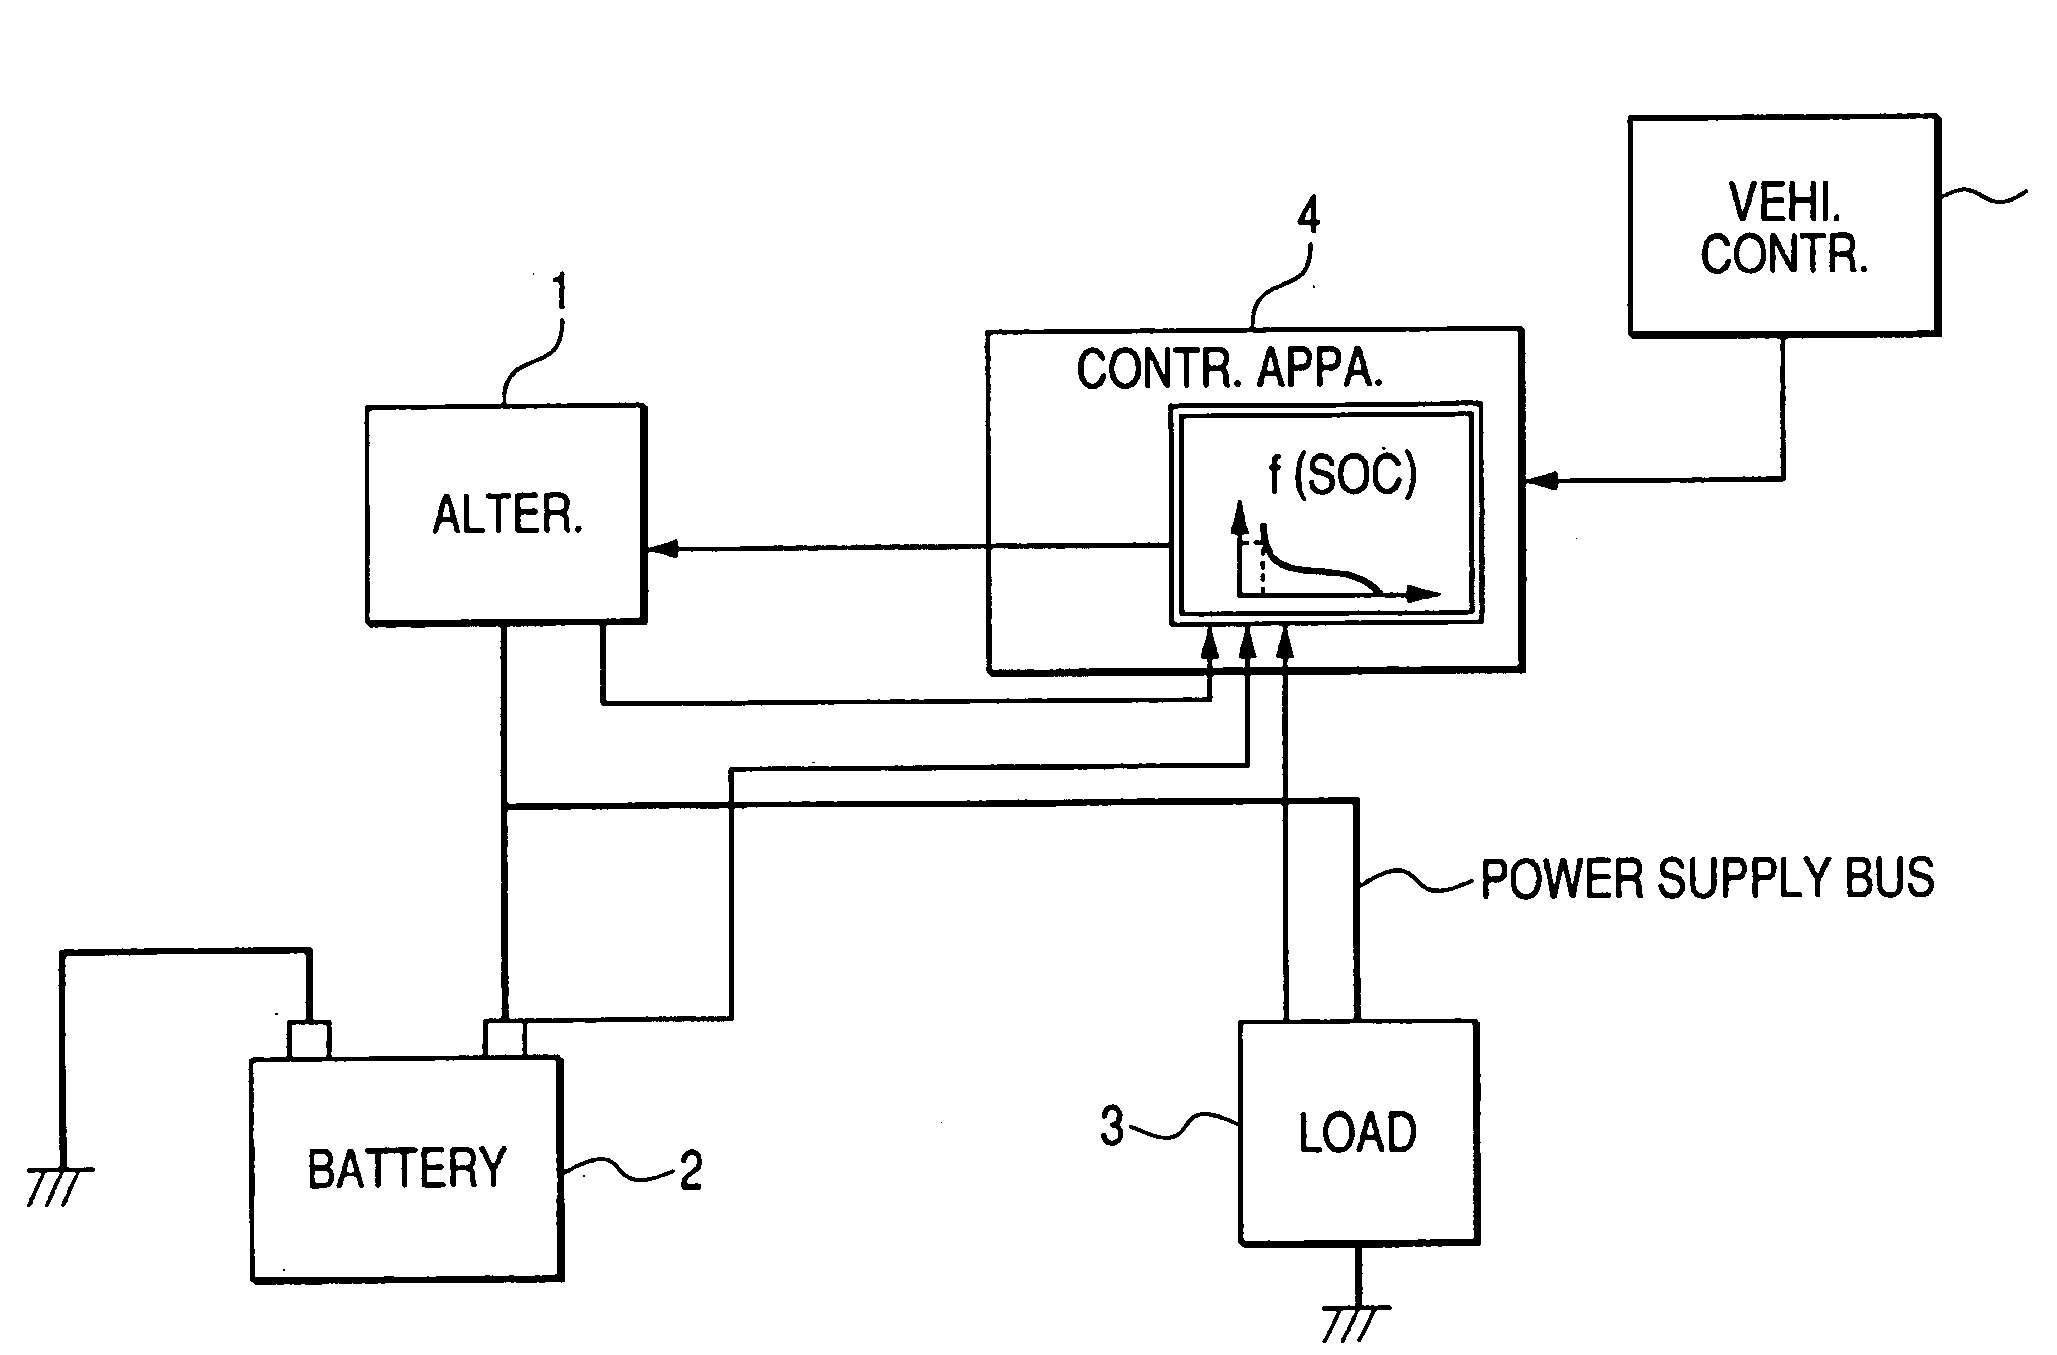 Control apparatus capable of economically and reliably controlling electric generator